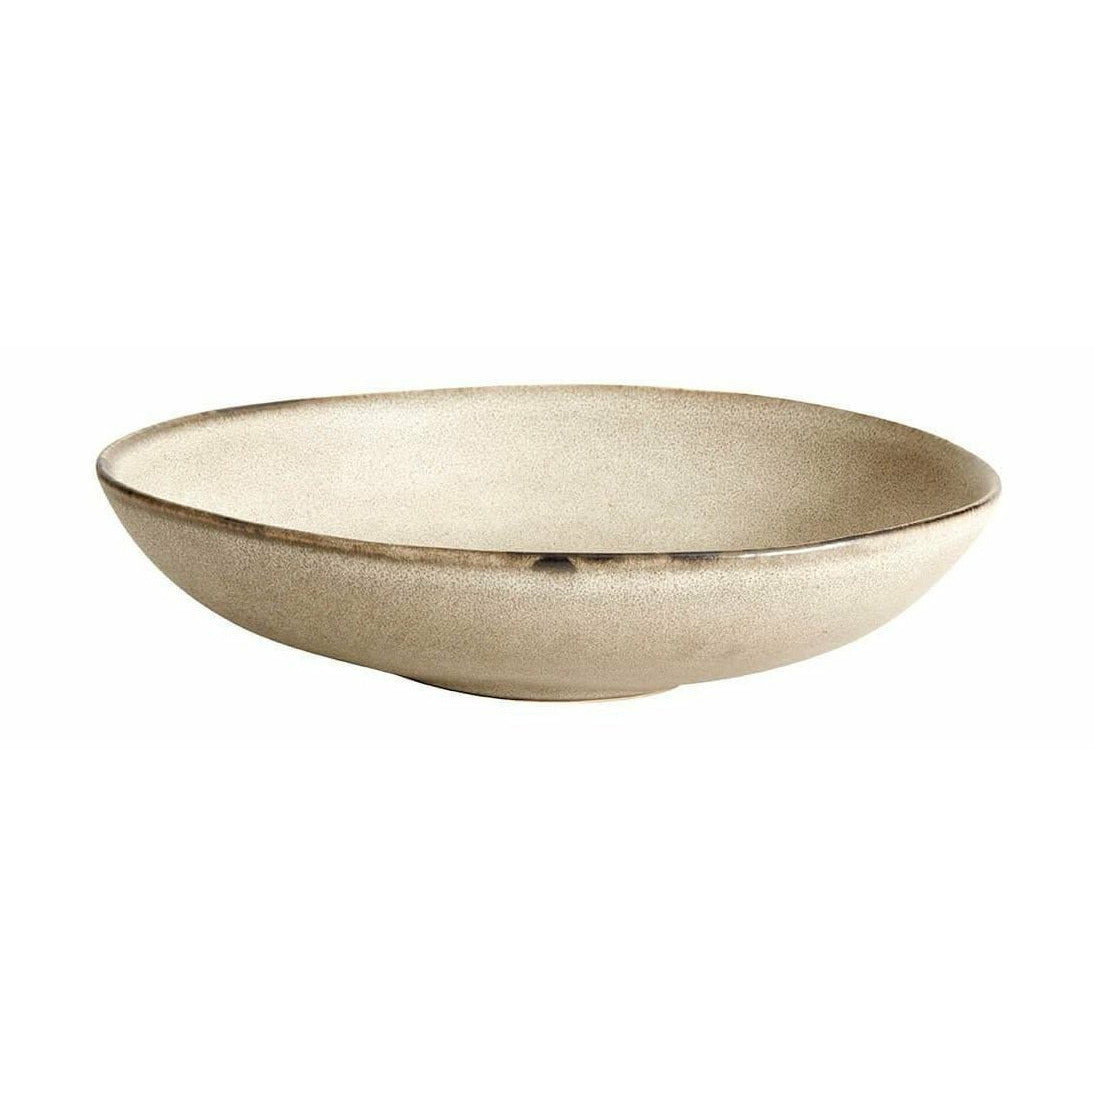 Muubs Mame serving bowl oester, 19 cm